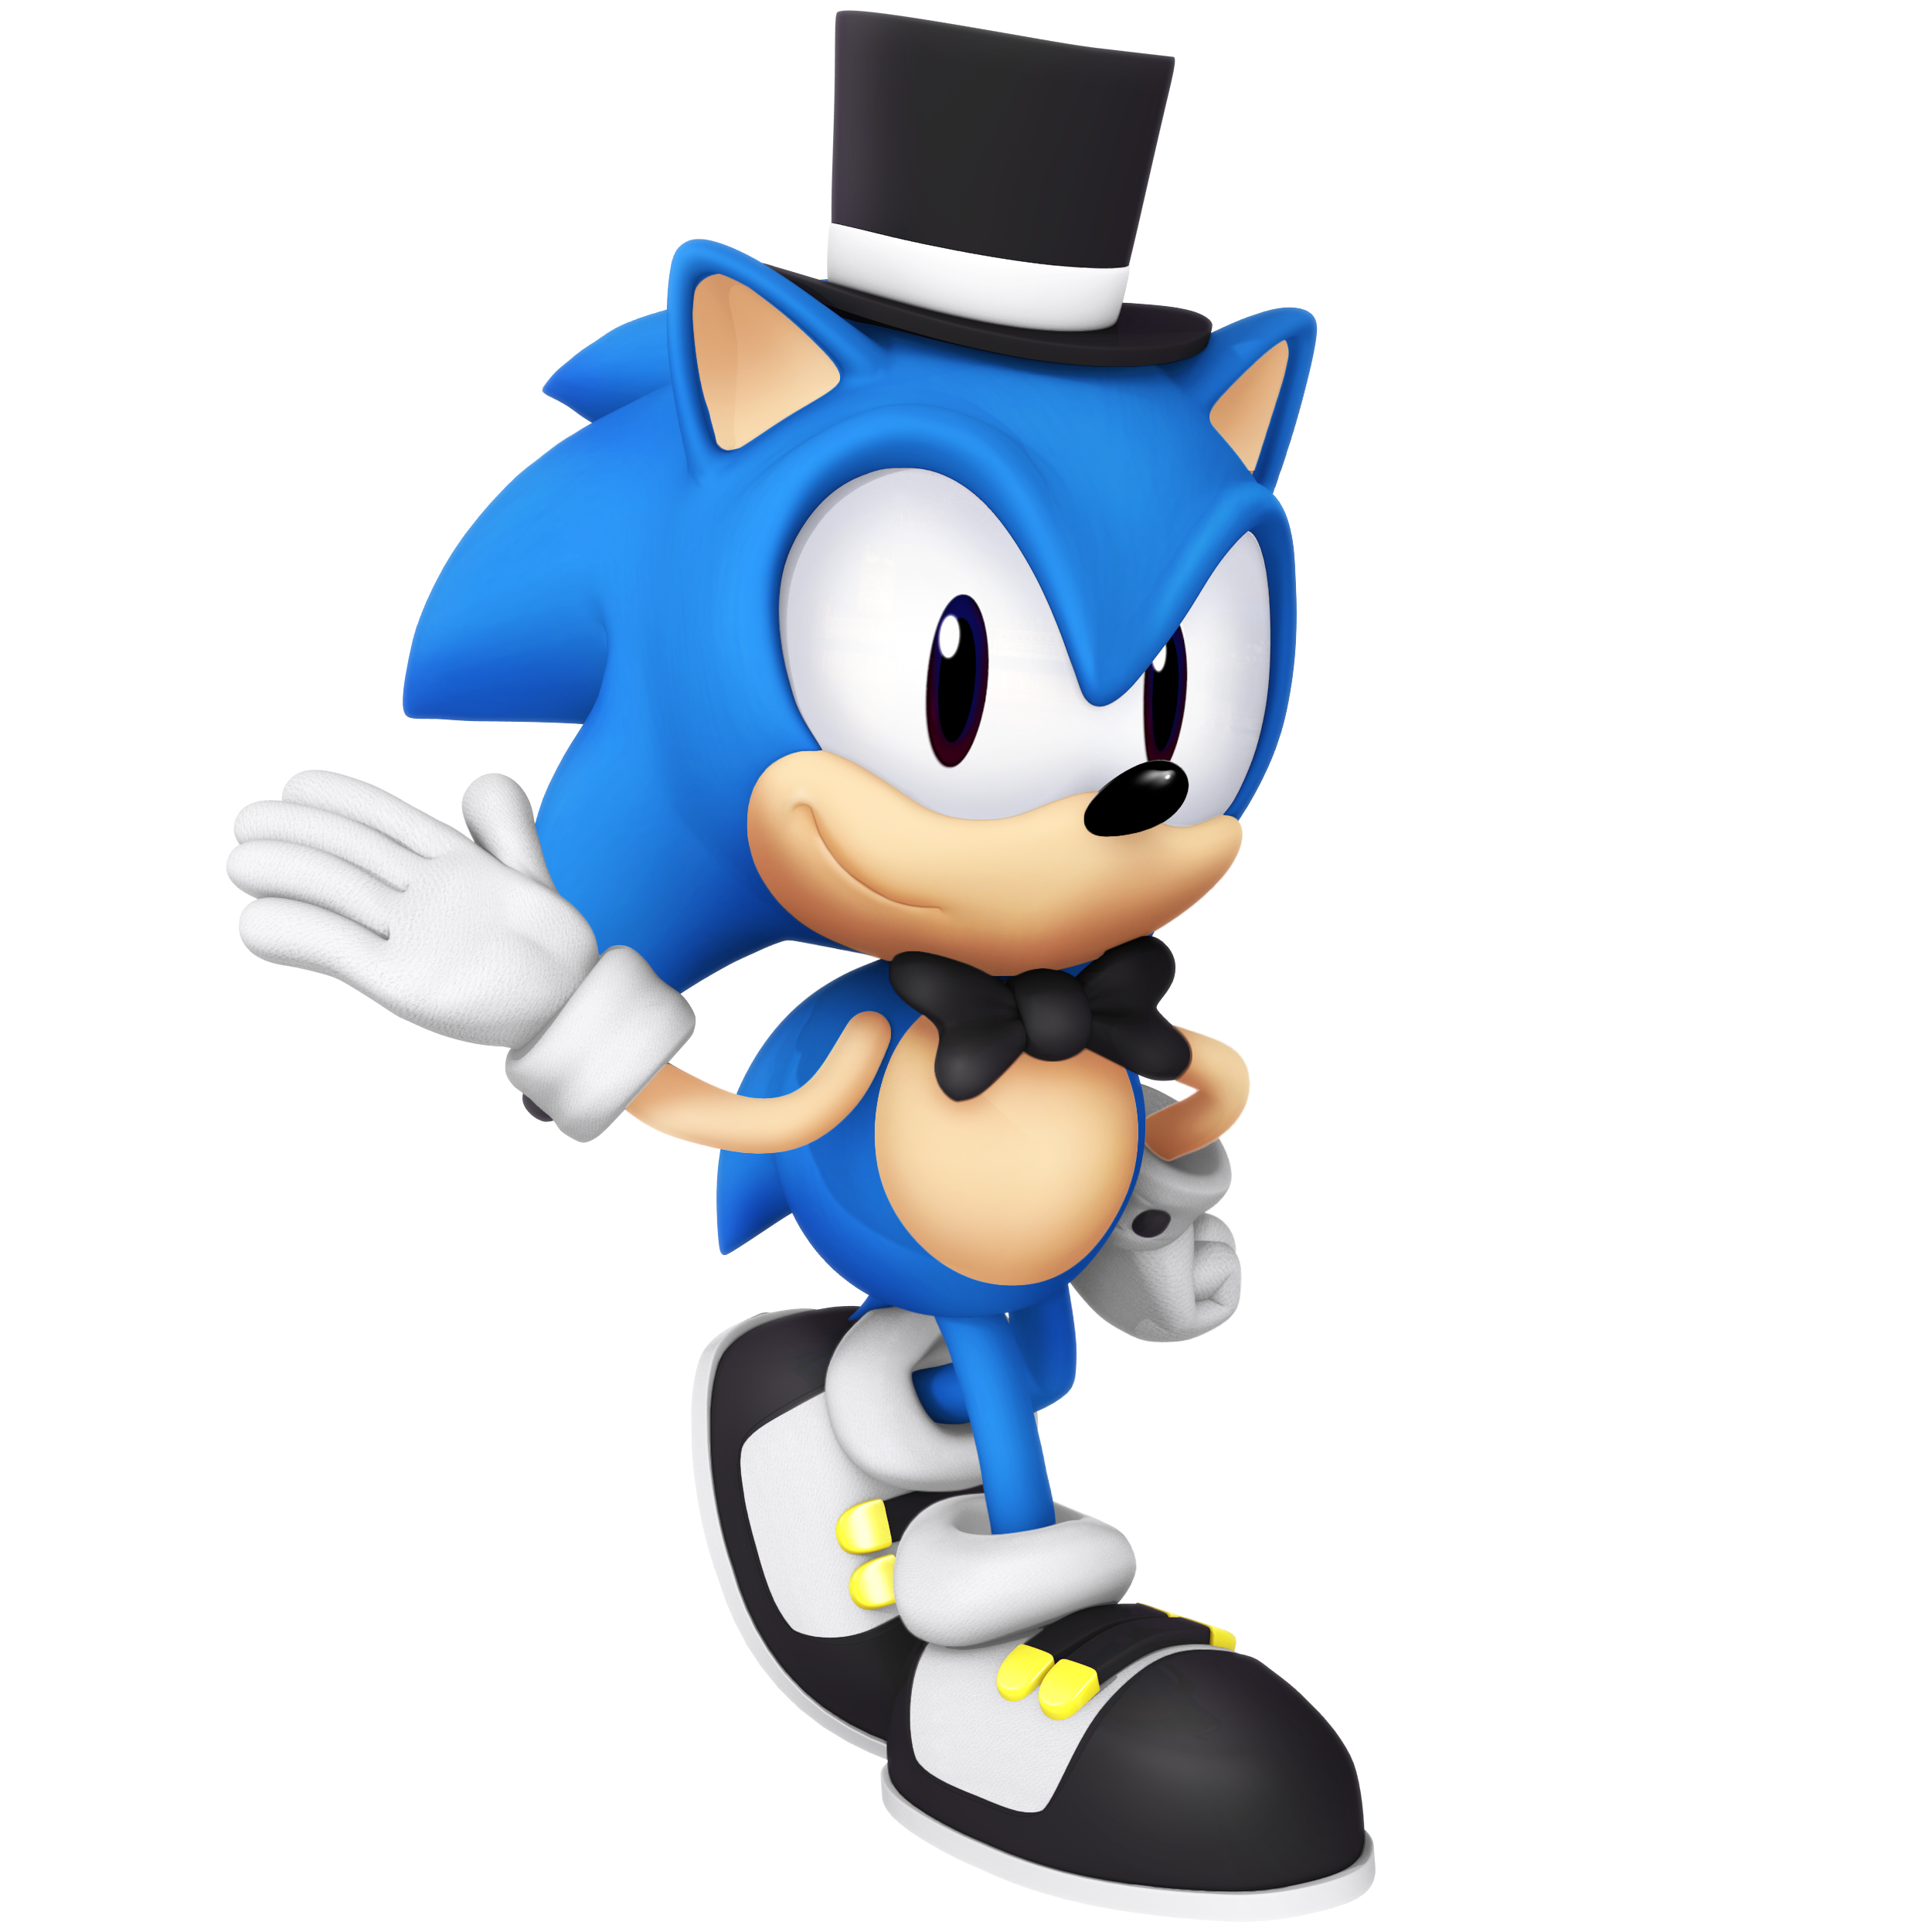 Tuxedo Classic Sonic Now Available for Sonic Speed Simulator